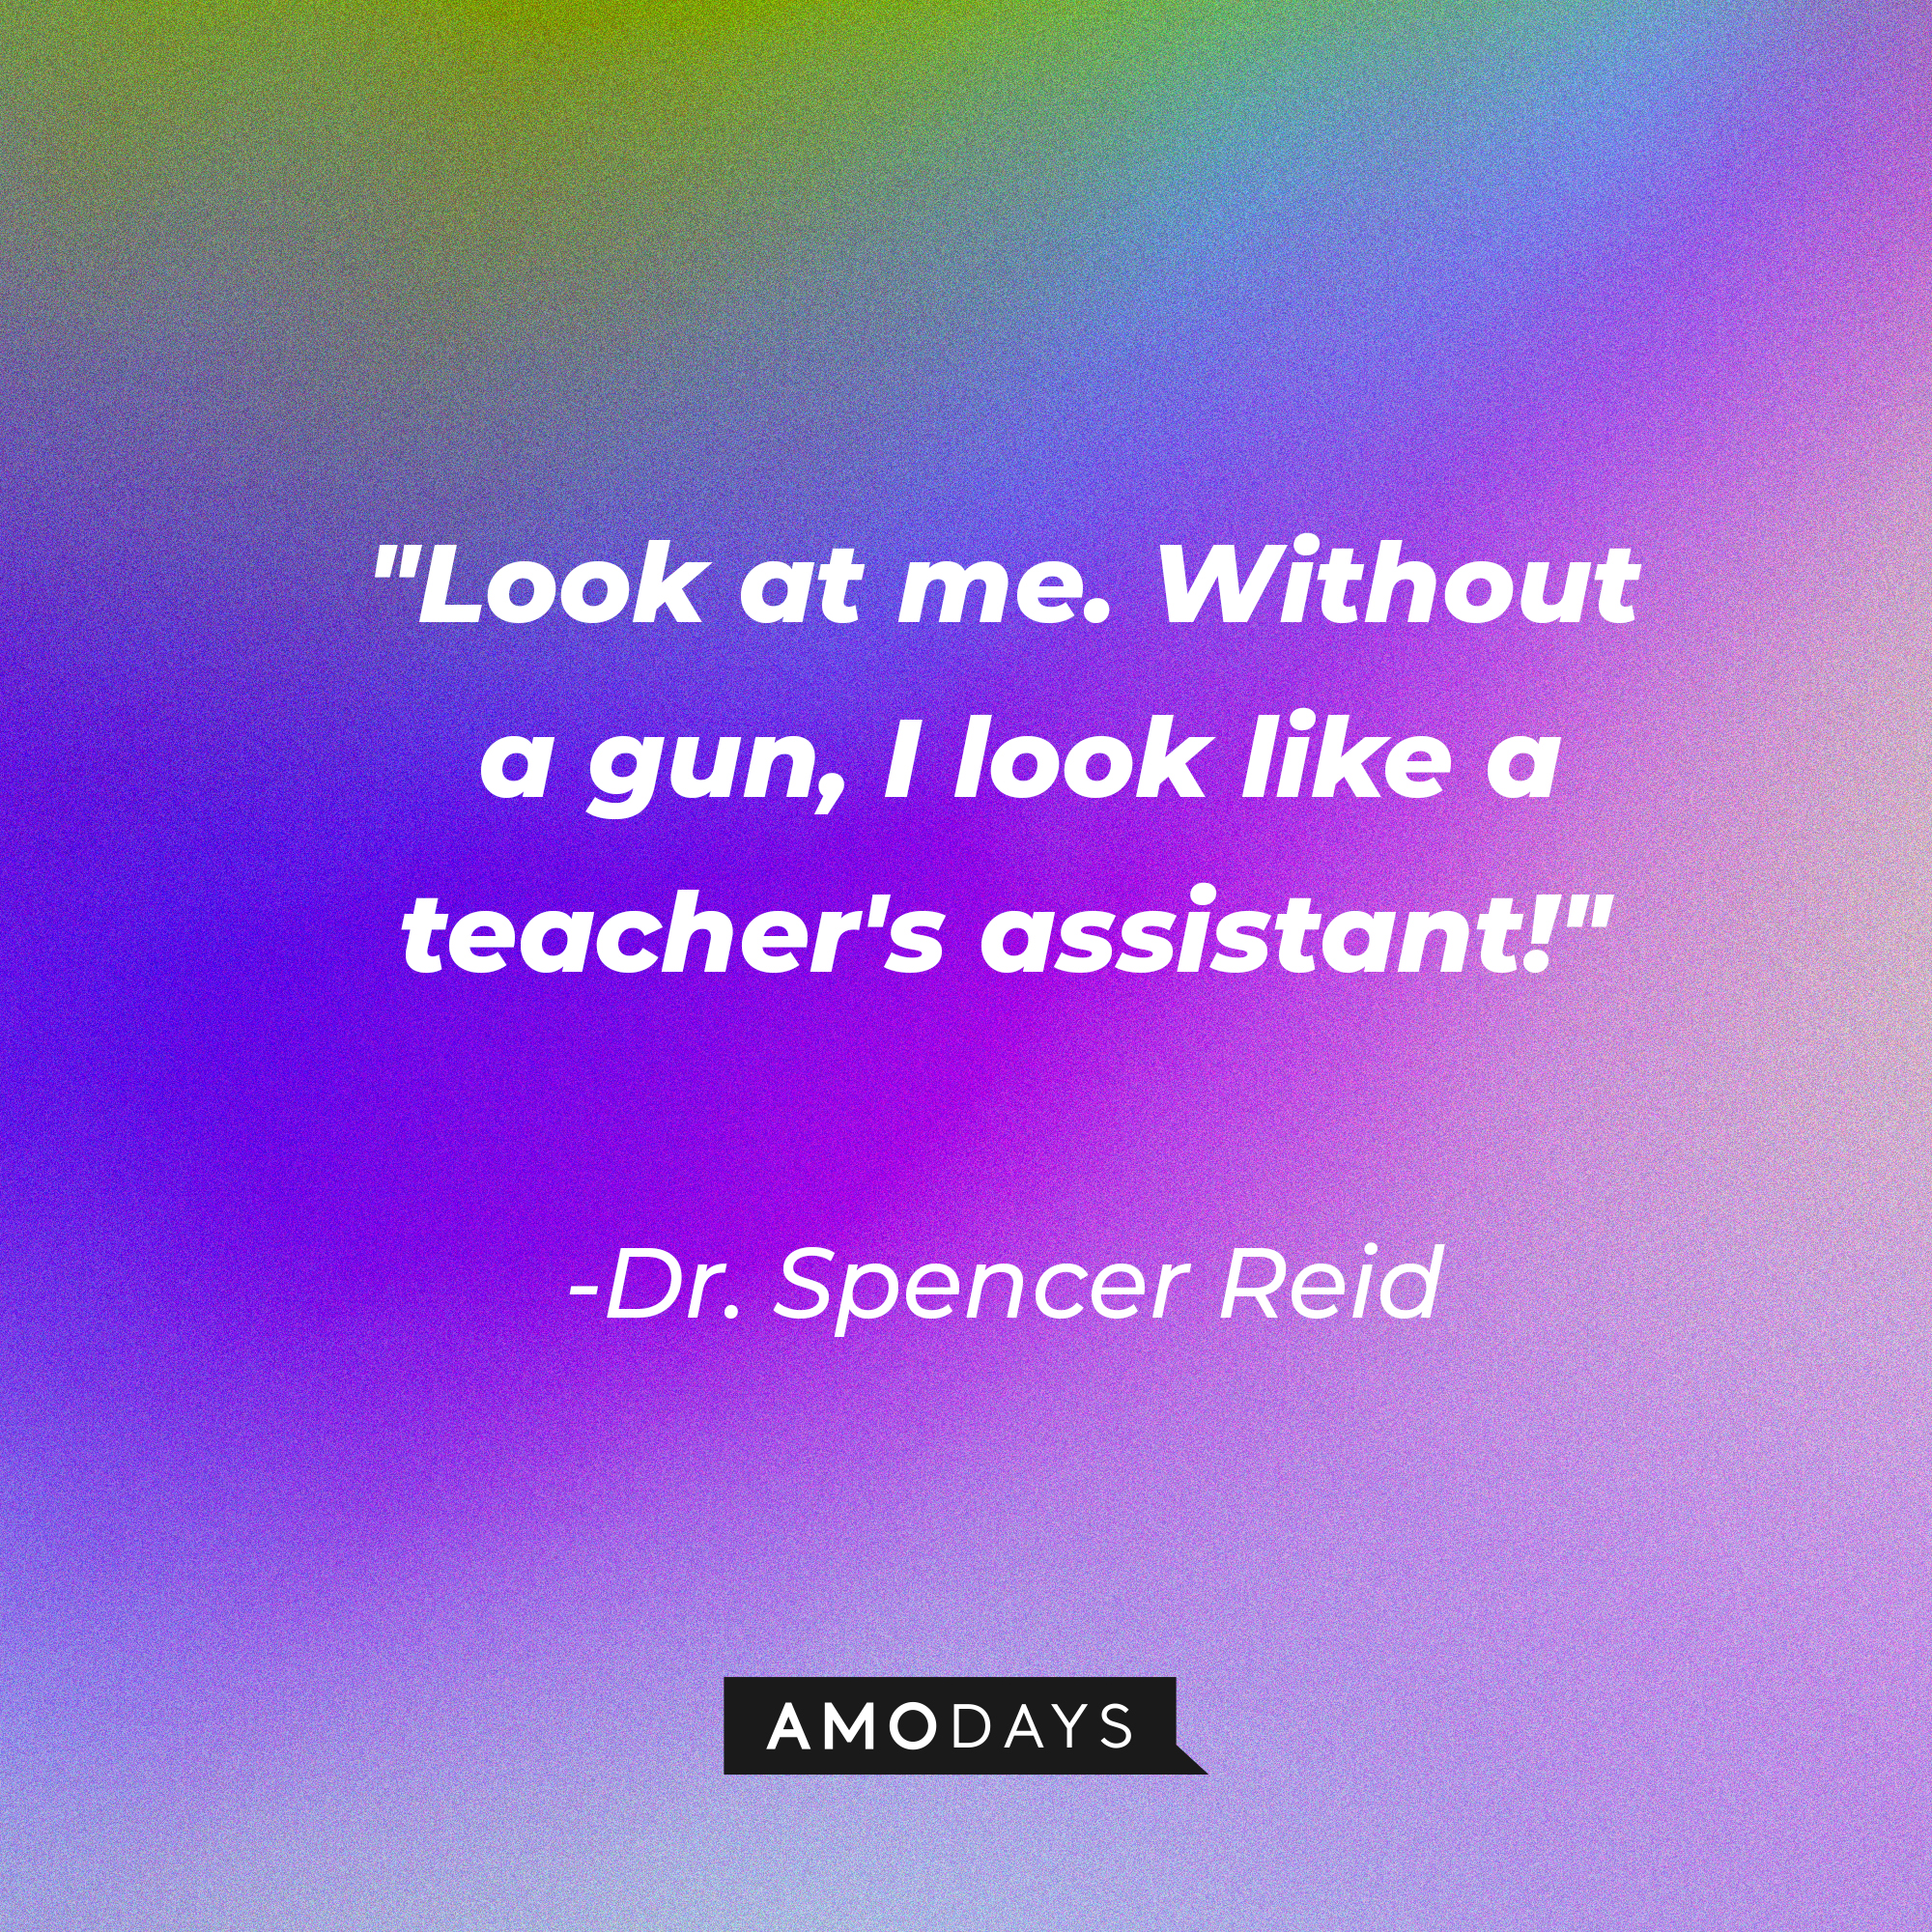 Dr. Spencer Reid's quote: "Look at me. Without a gun, I look like a teacher's assistant!" | Source: AmoDays